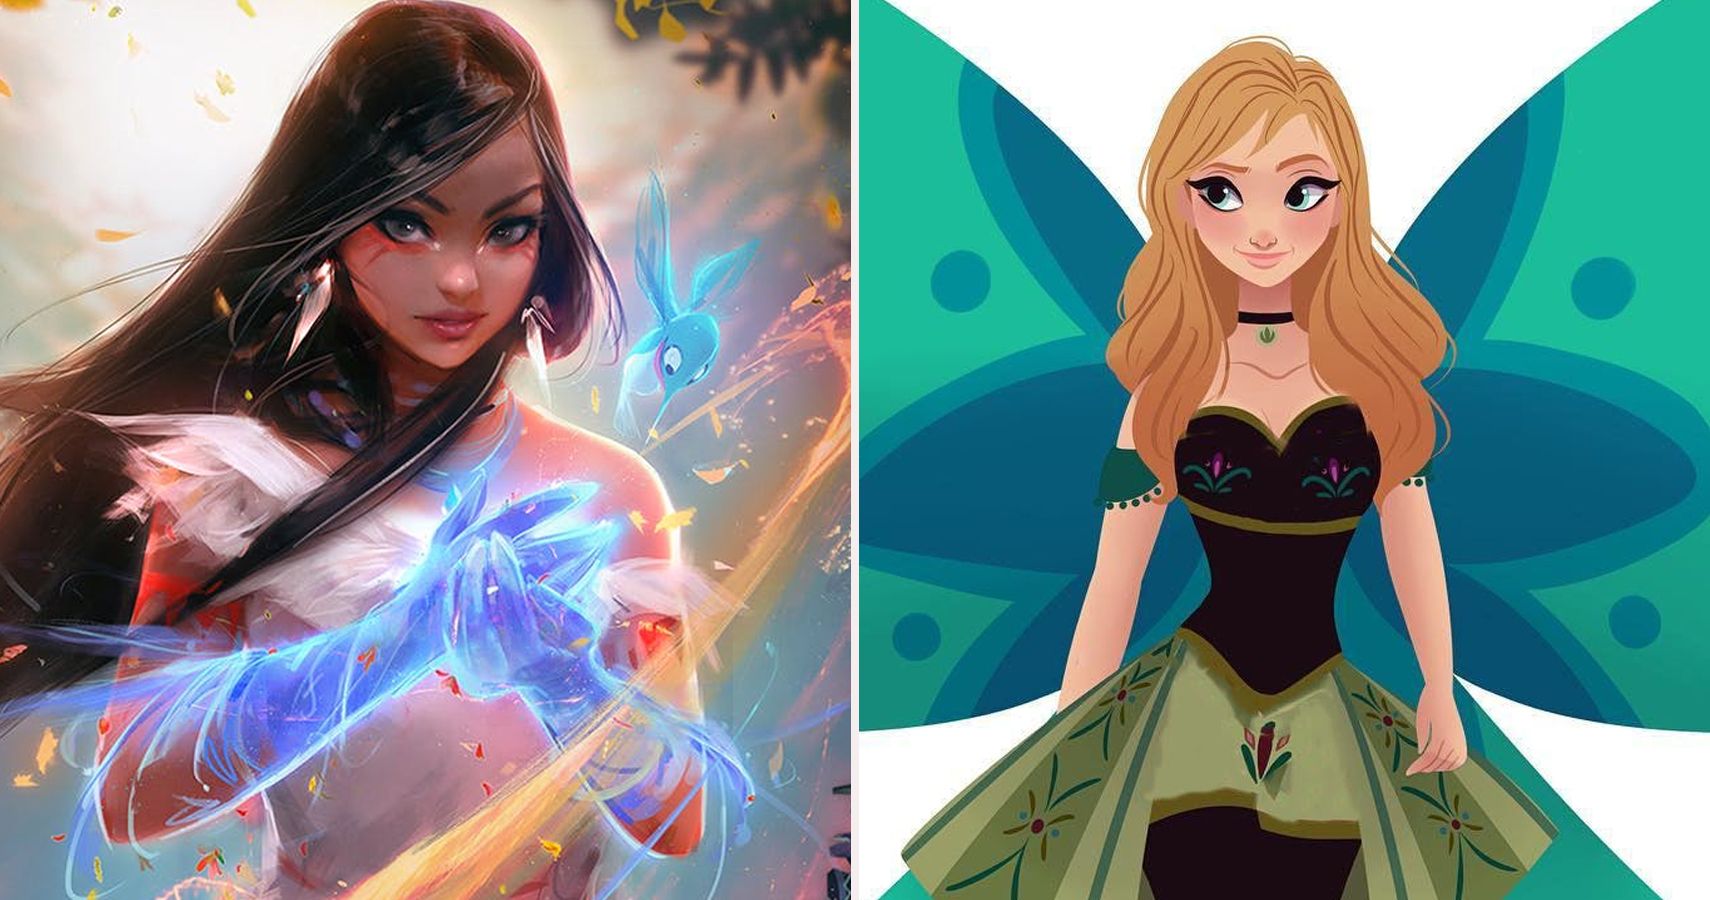 27 Fan Photos Of Our Favorite Disney Princesses (That Change The Way We